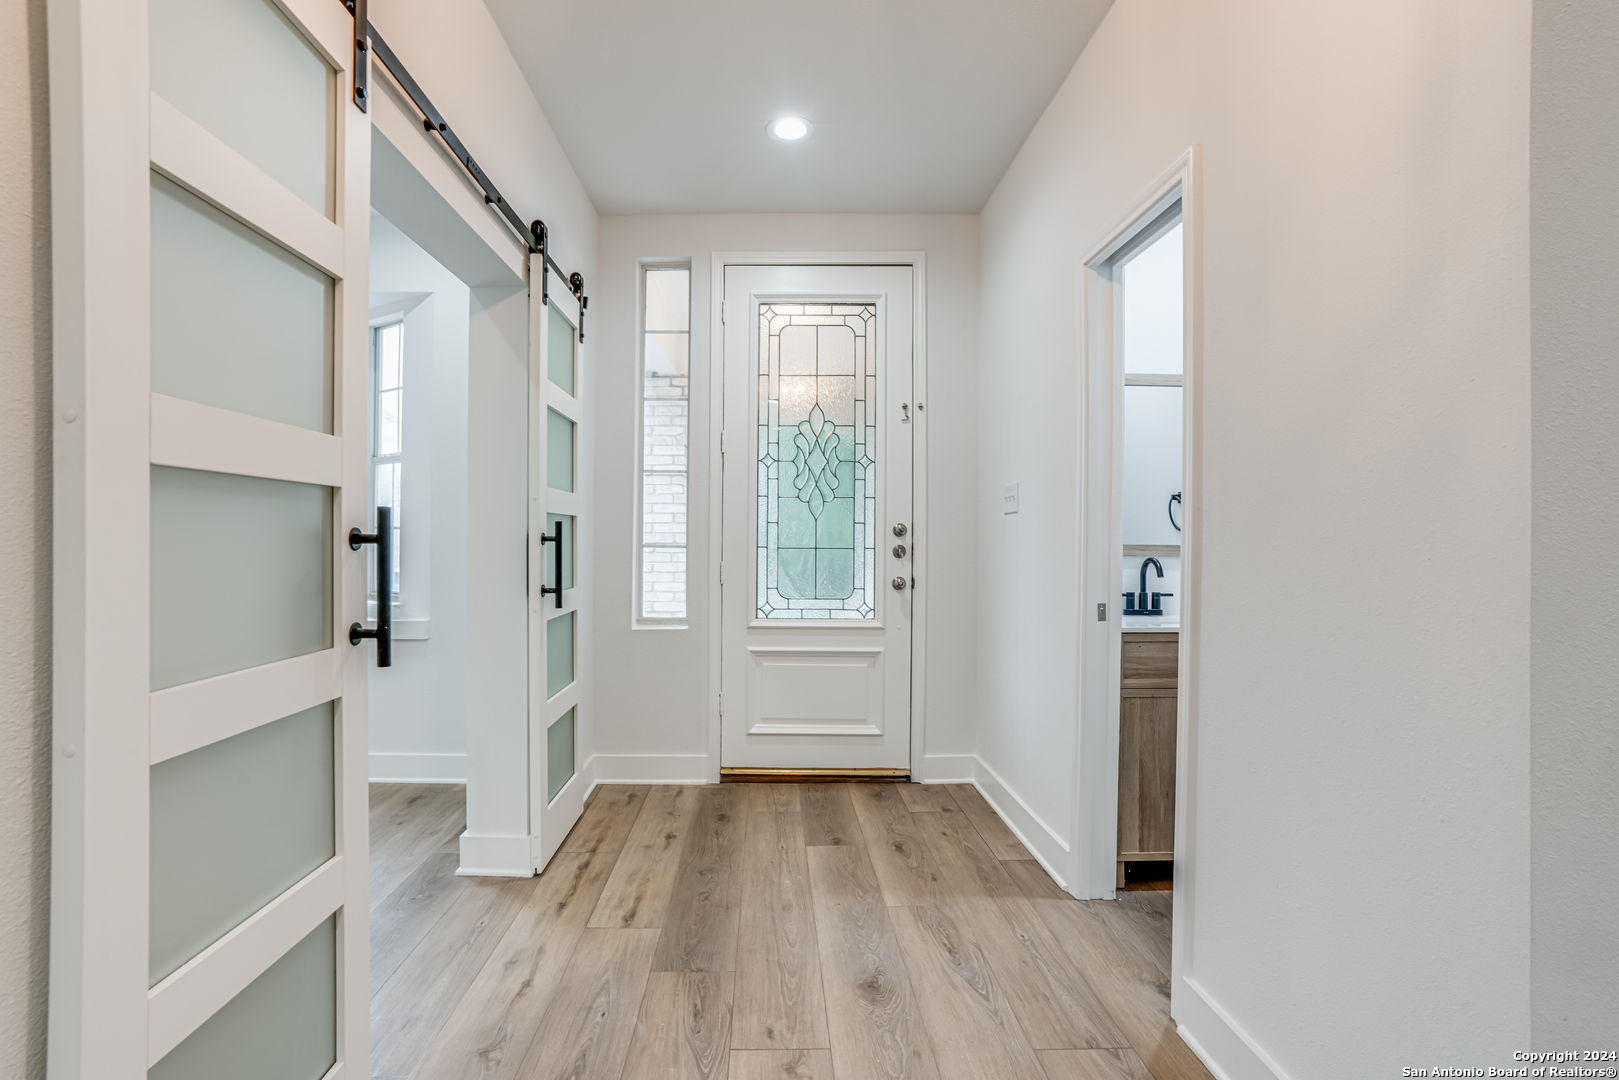 a view of a hallway with wooden floor and closet area